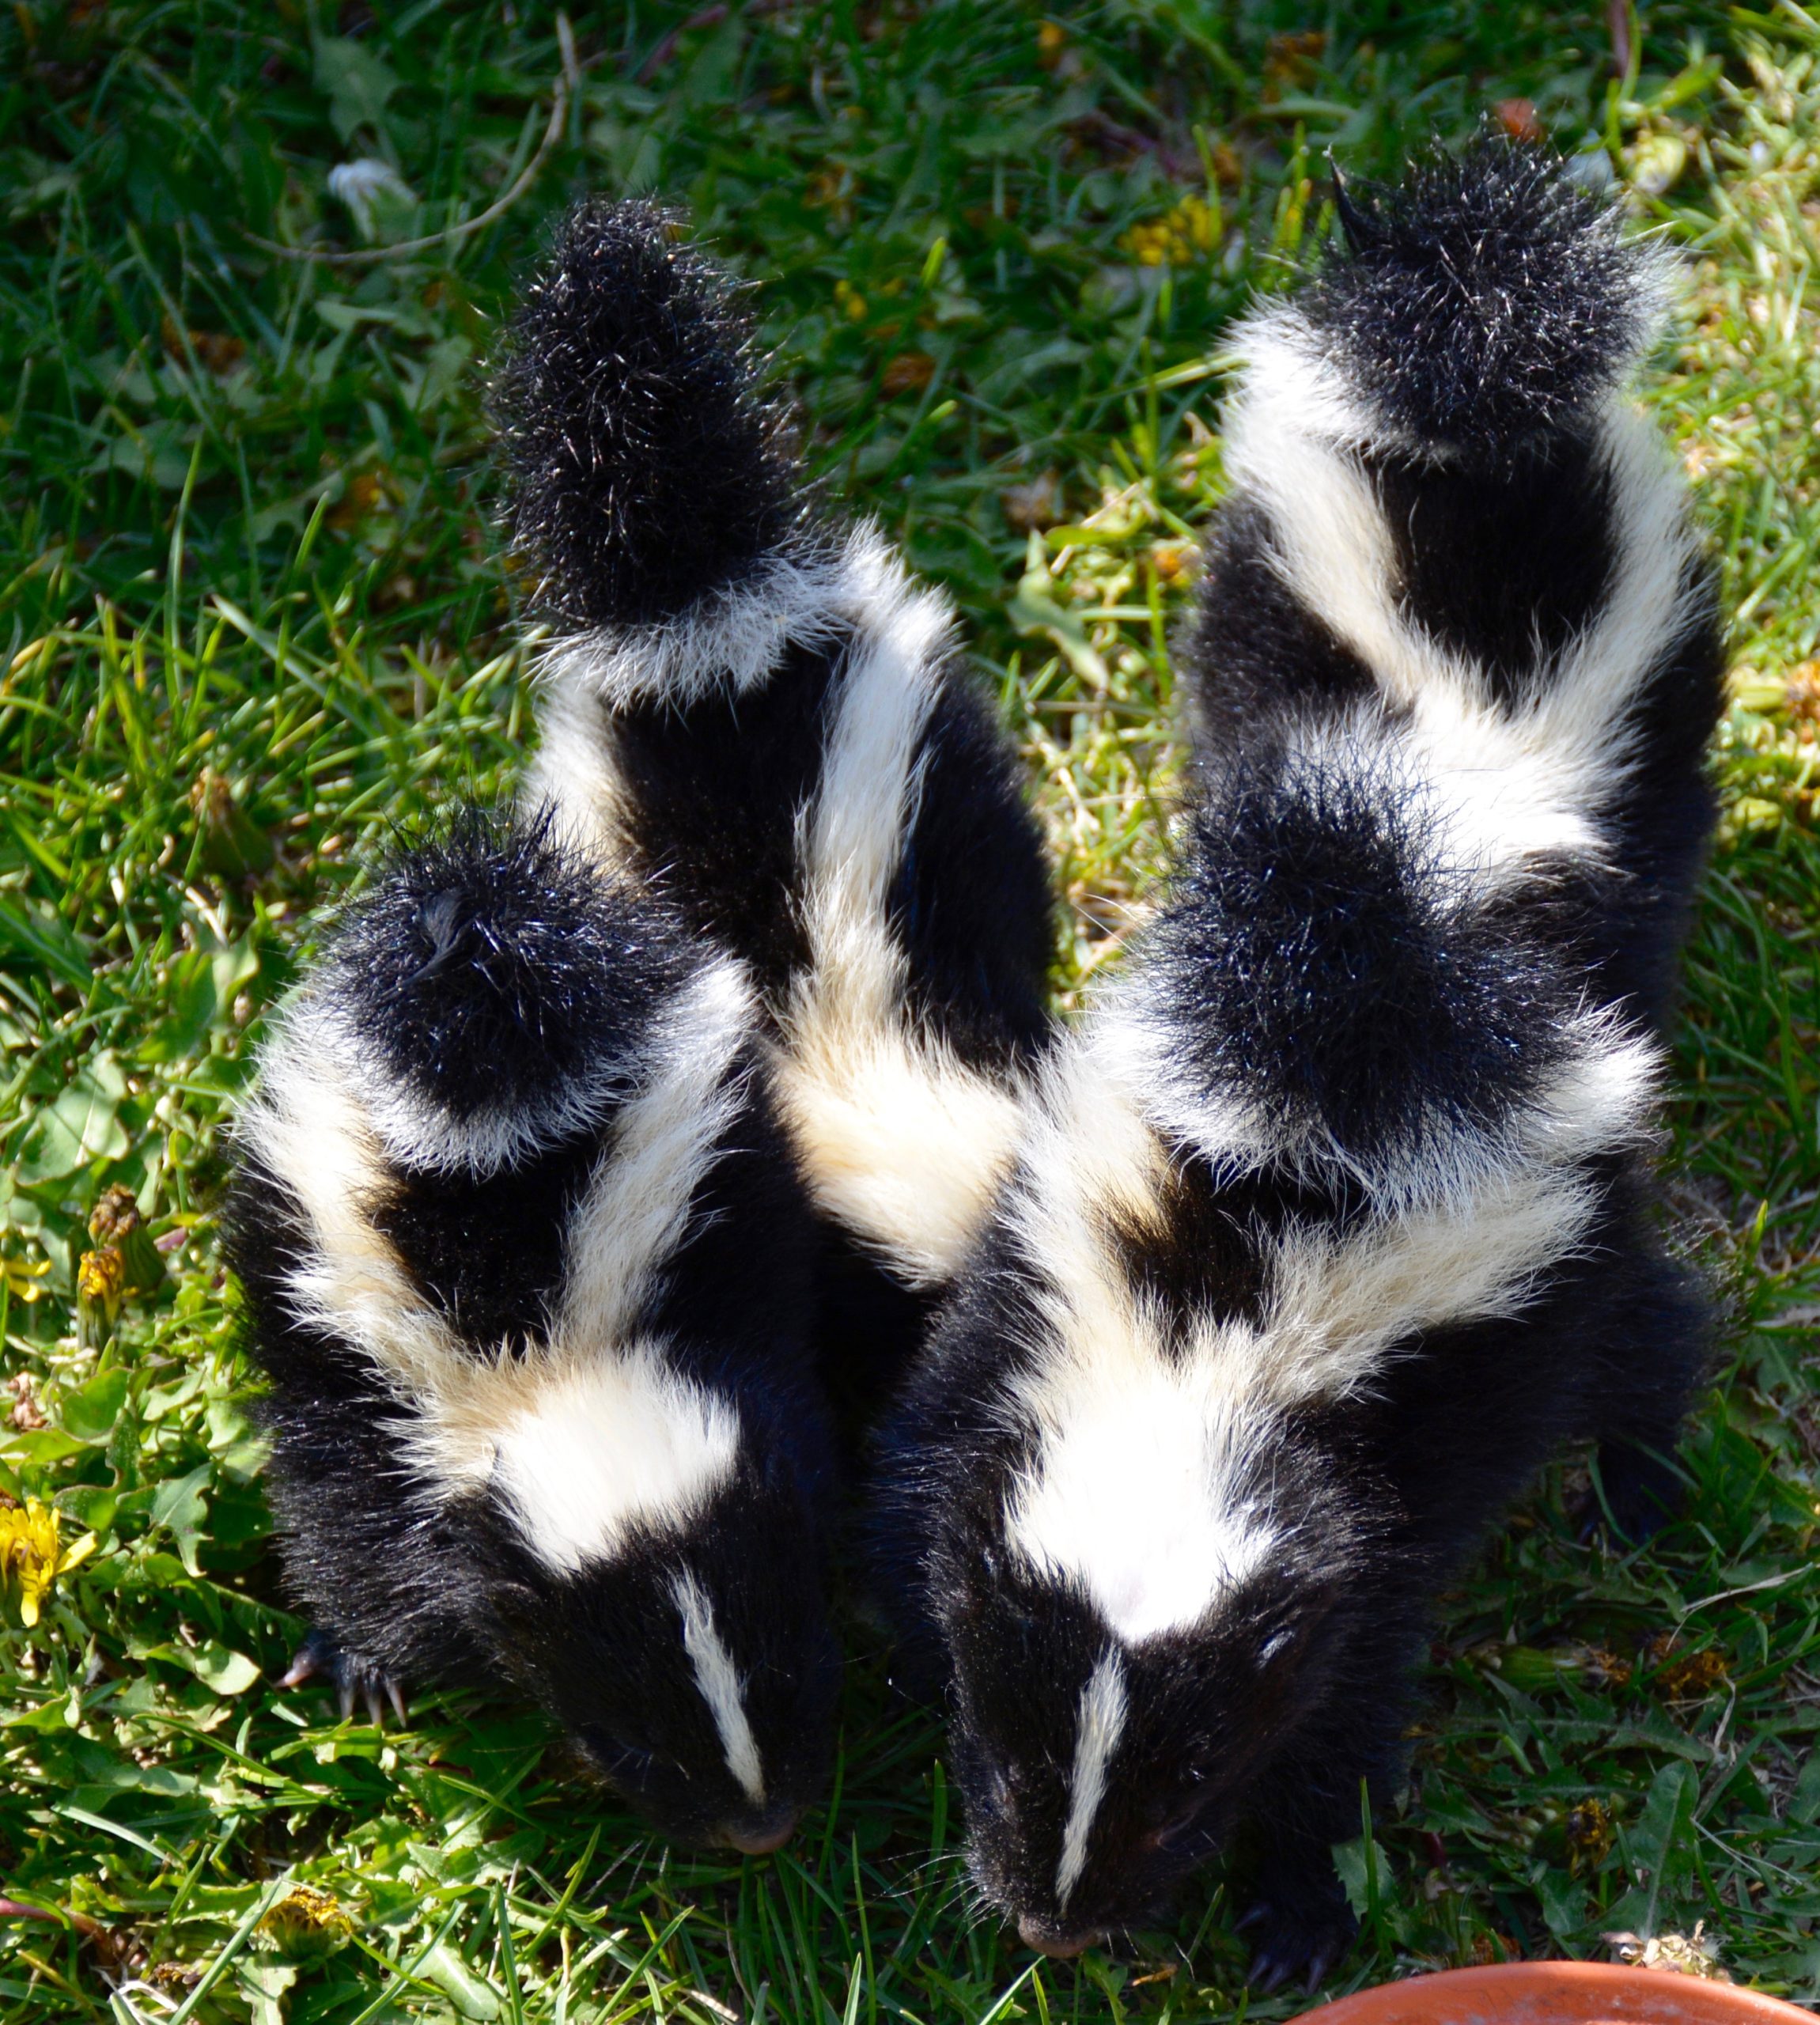 SOS: Save our skunks! - Alberta Institute For Wildlife Conservation